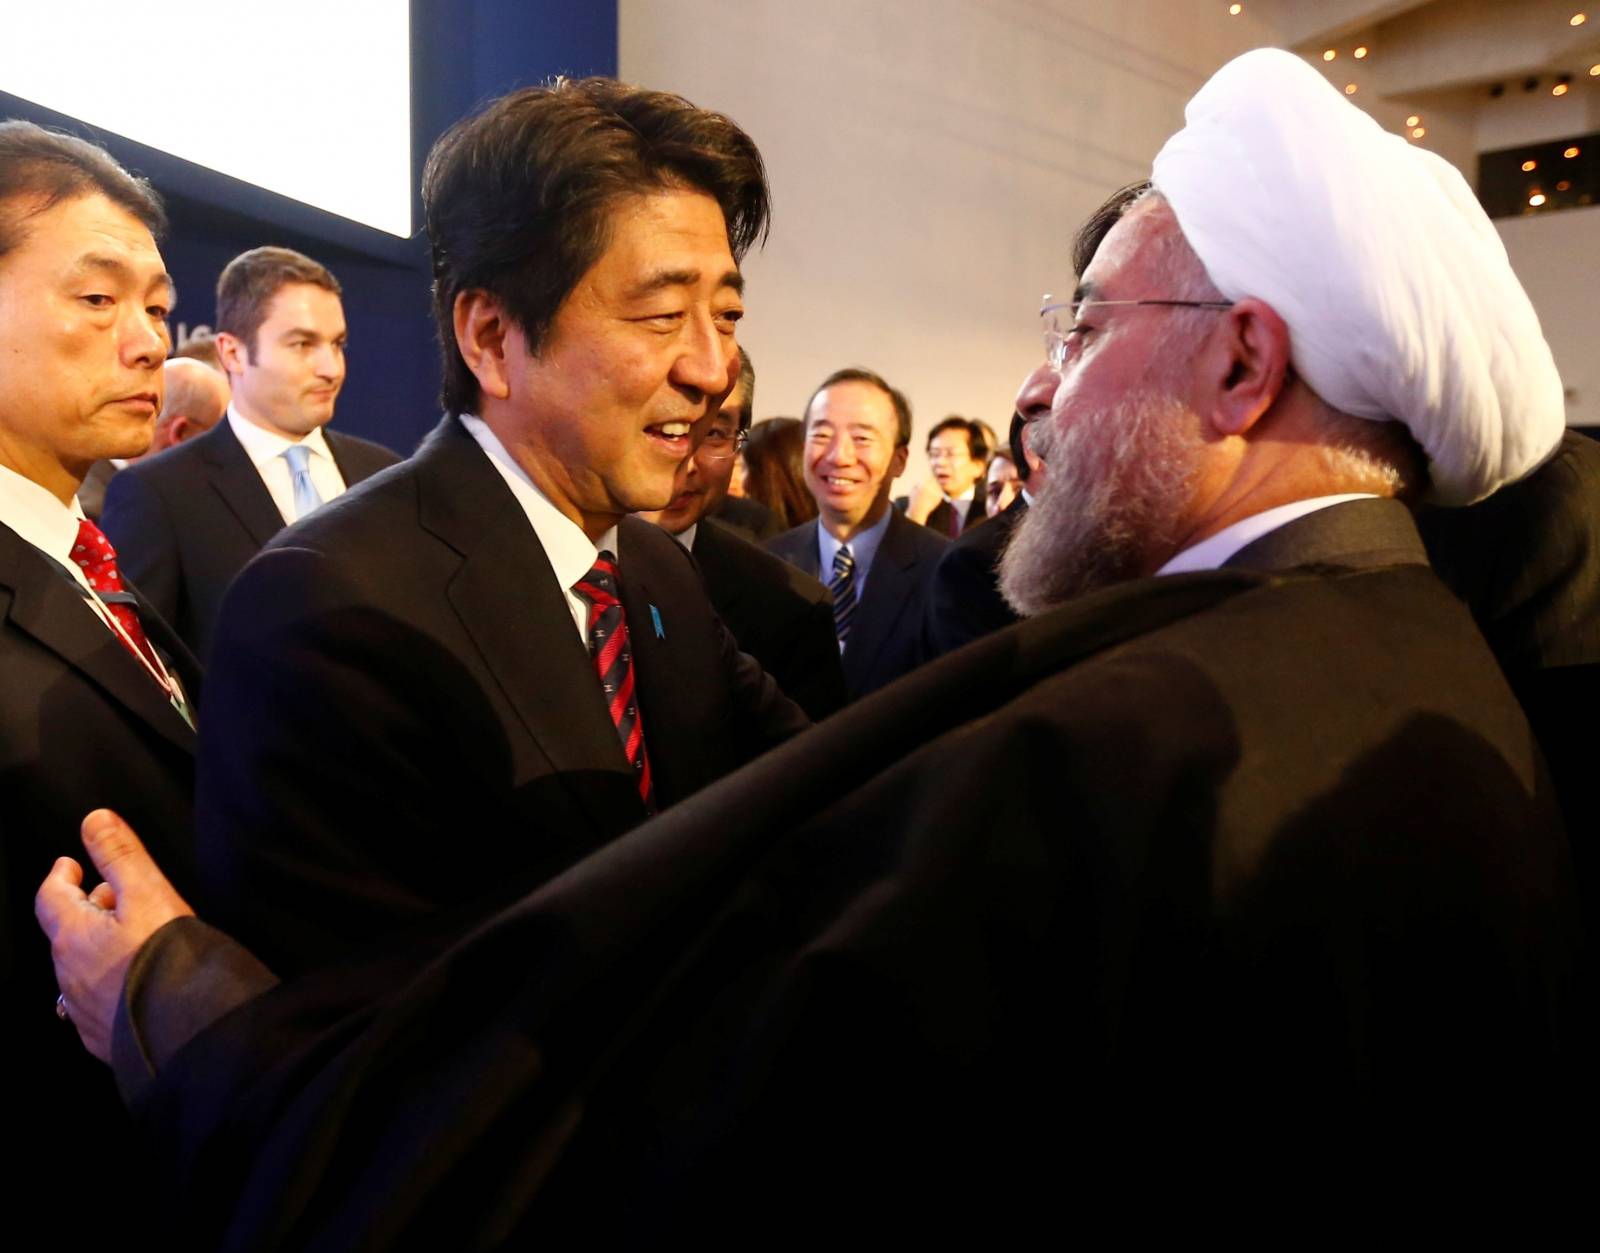 FILE PHOTO: Japan's Prime Minister Abe greets Iran's President Rouhani  at World Economic Forum in Davos